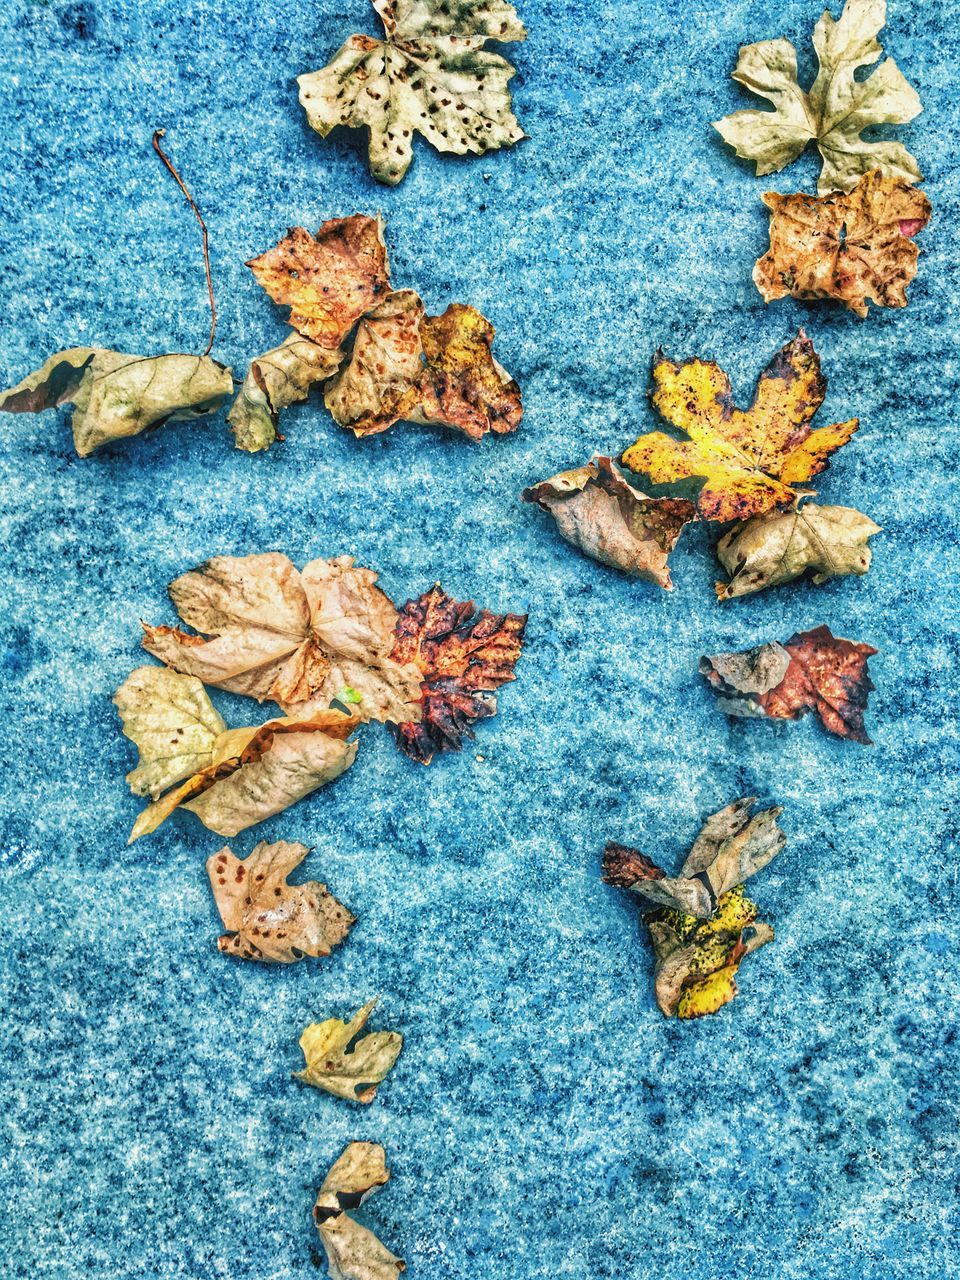 HIGH ANGLE VIEW OF DRY LEAVES ON BLUE SURFACE